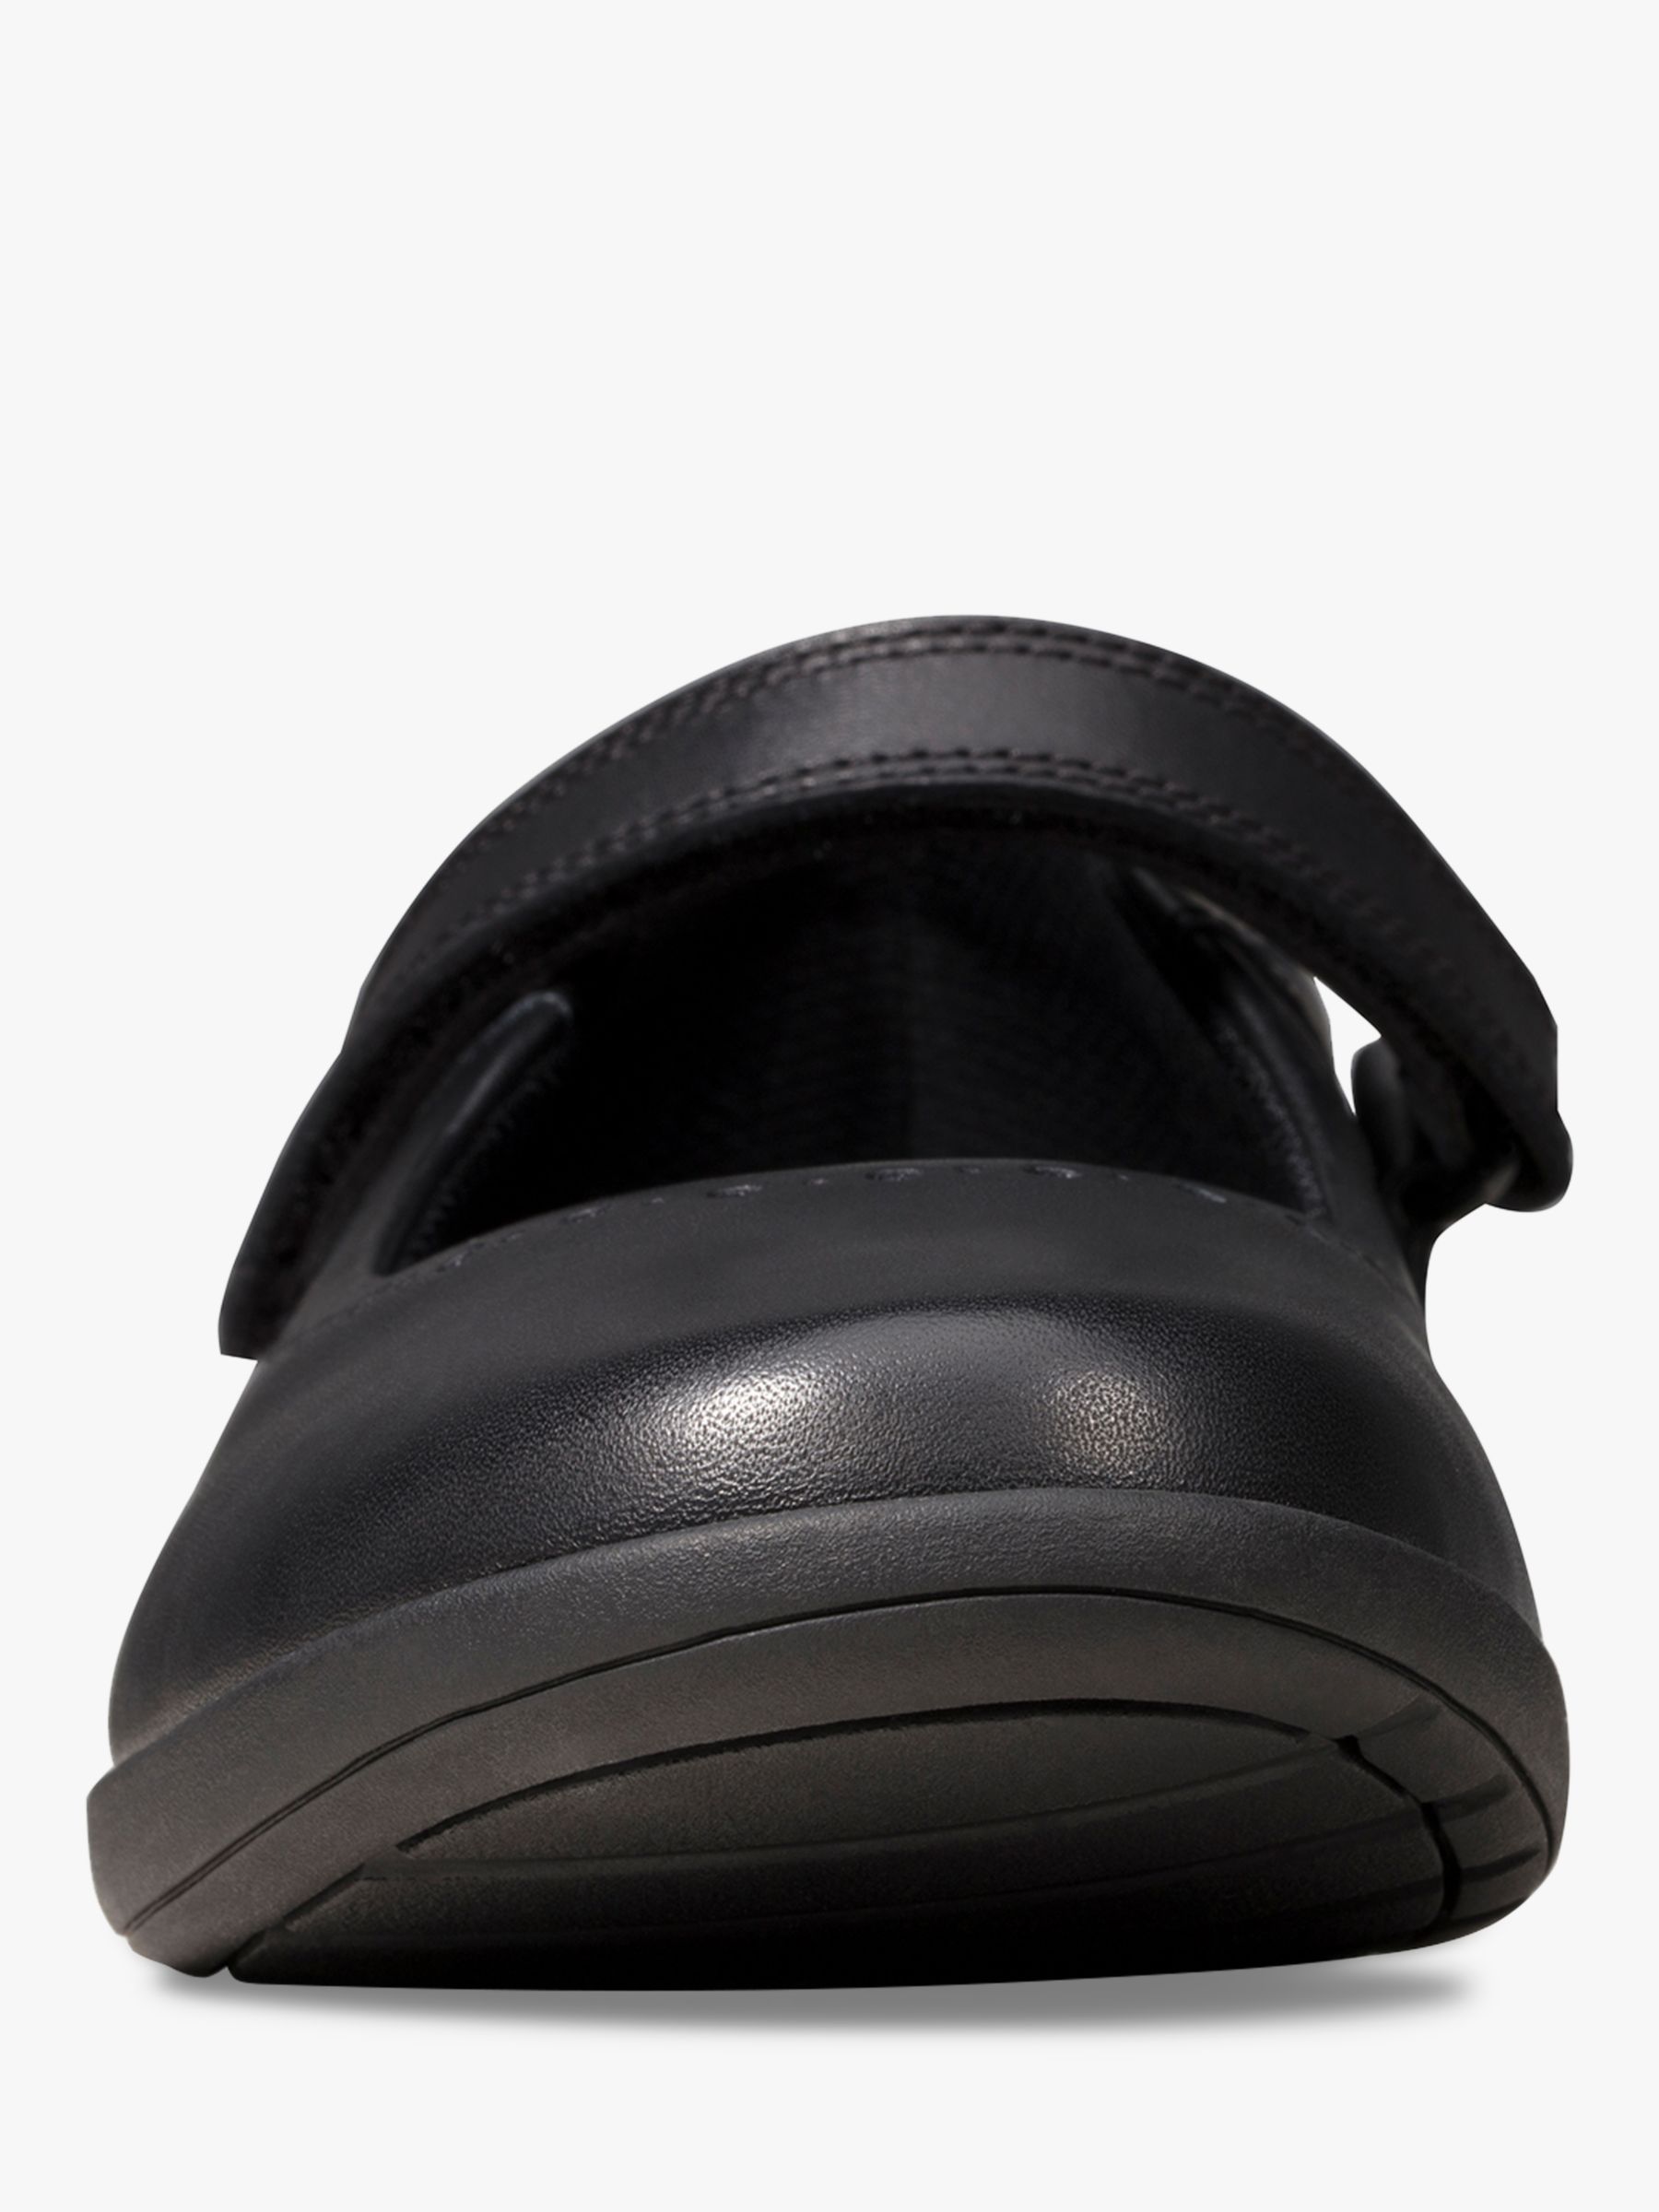 clarks black leather shoes